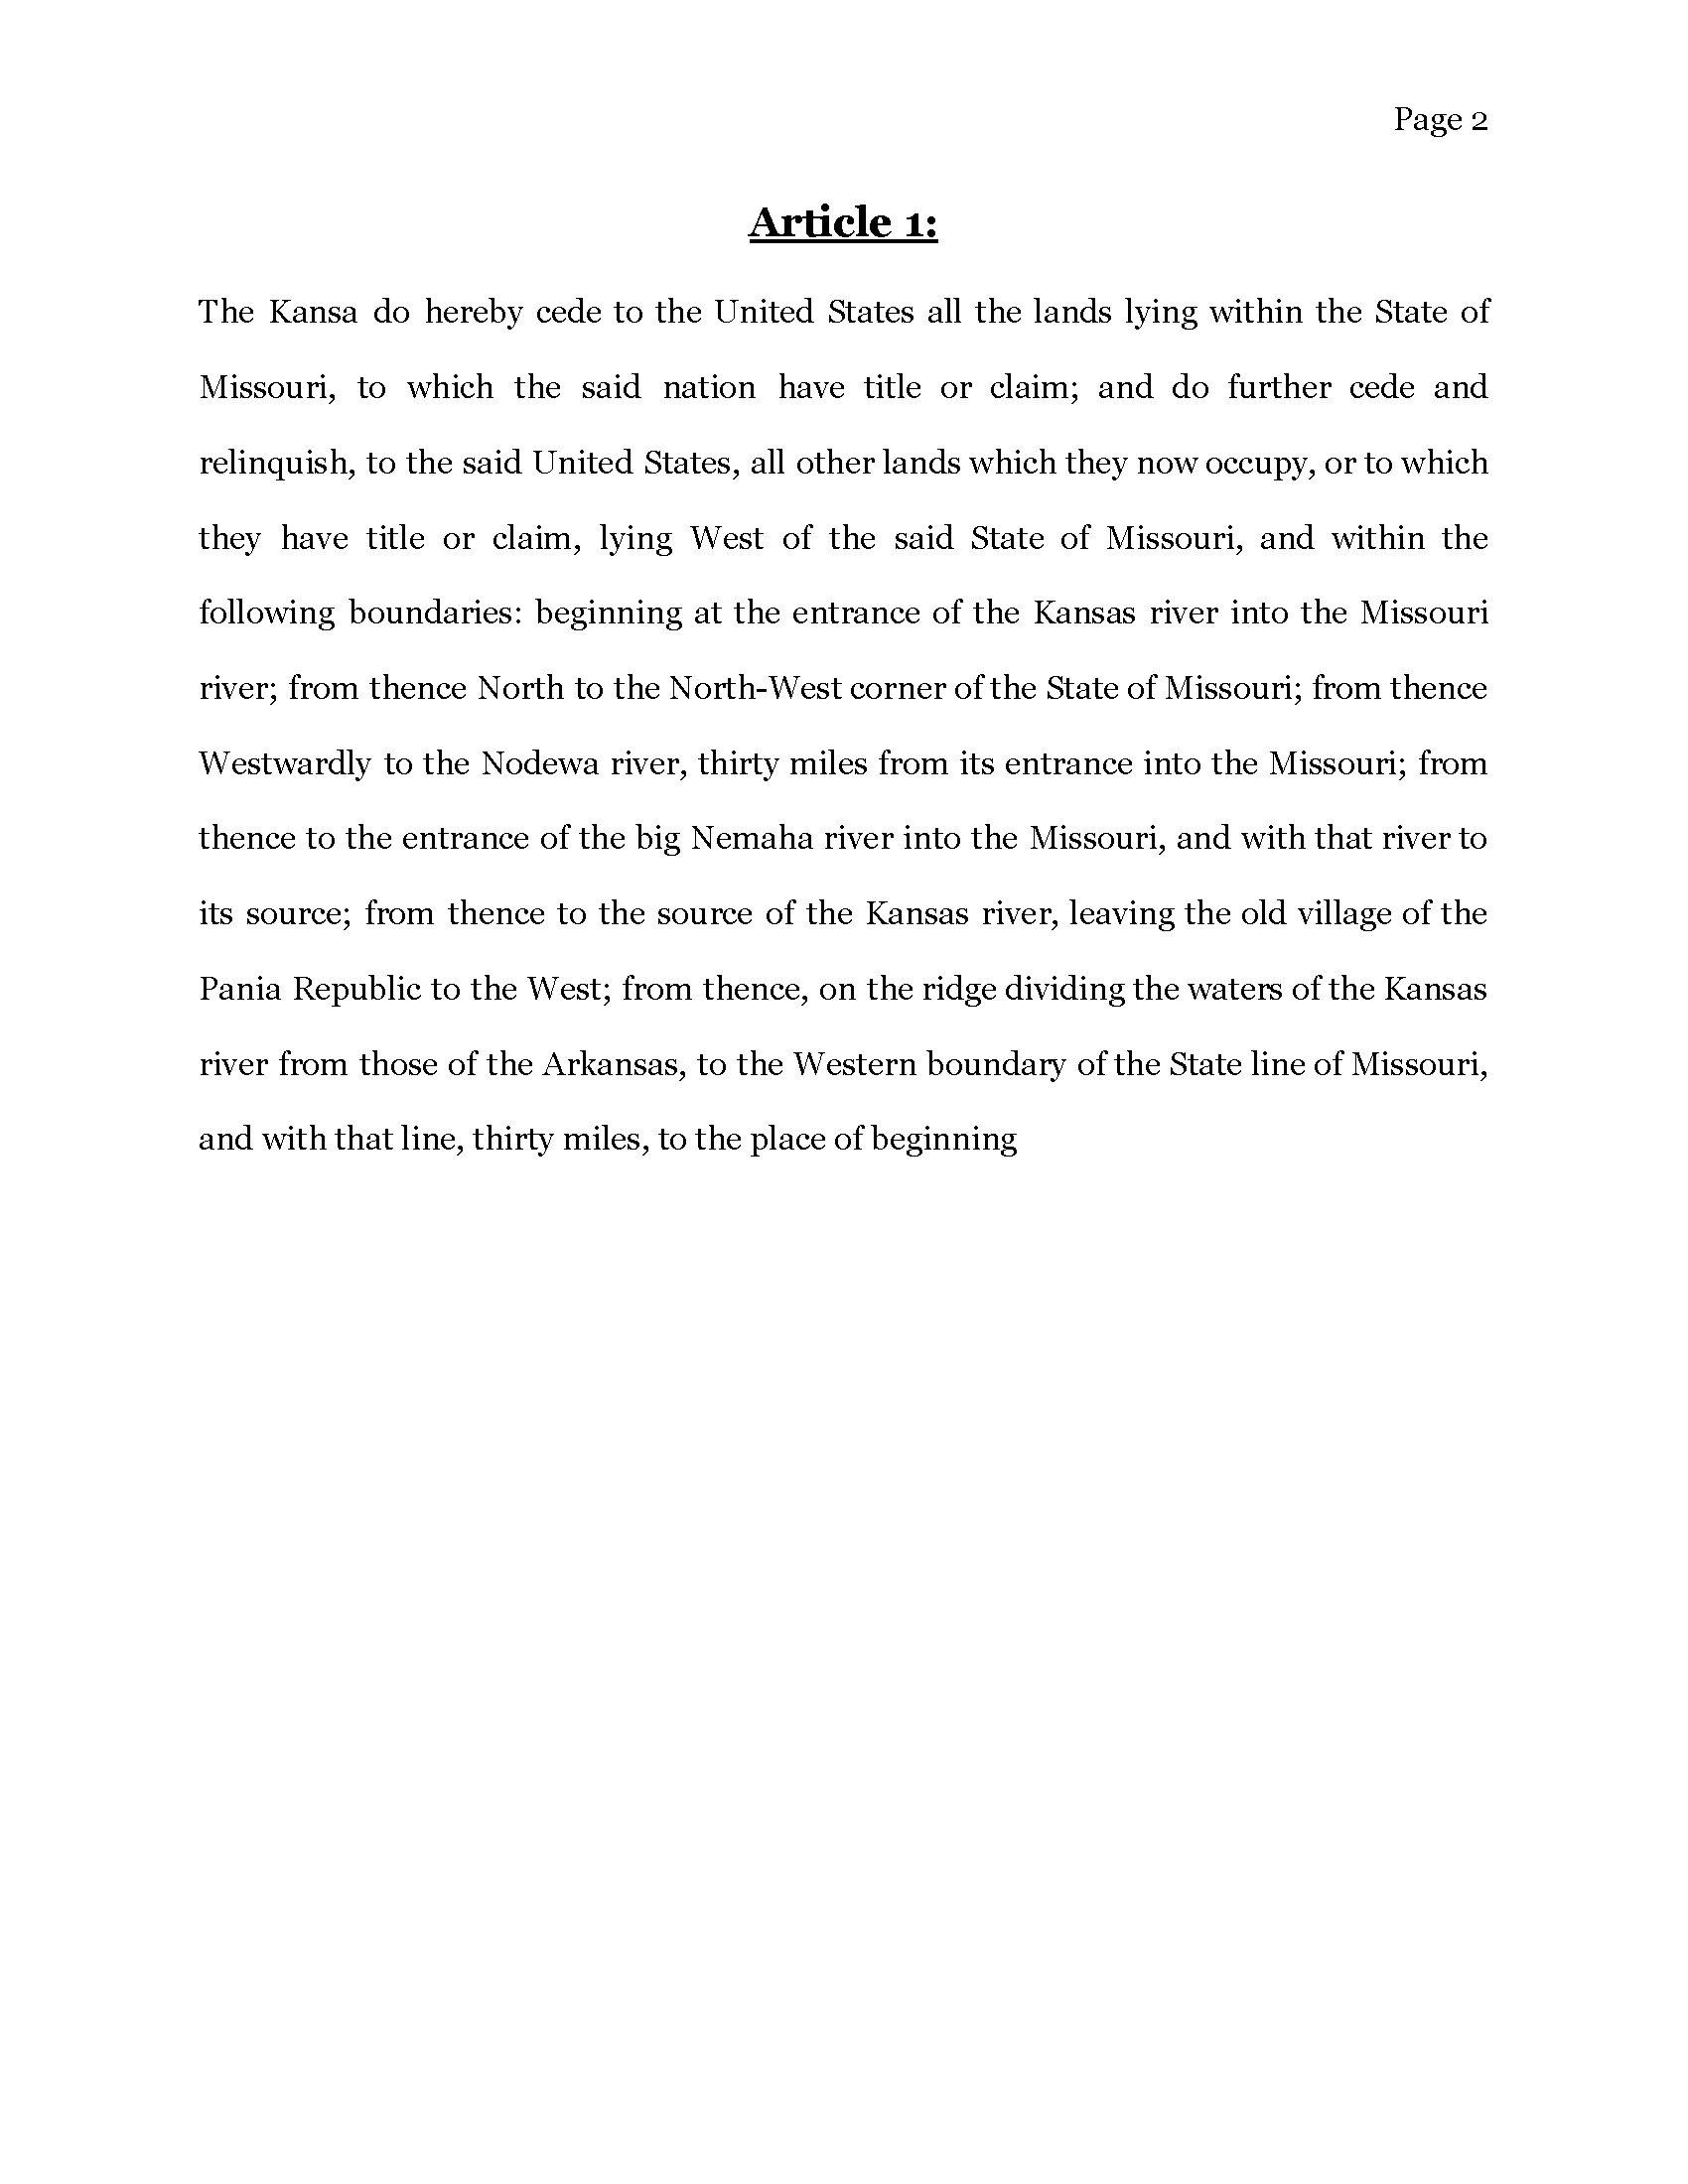 Transcribed Treaty of 1825, Page 2